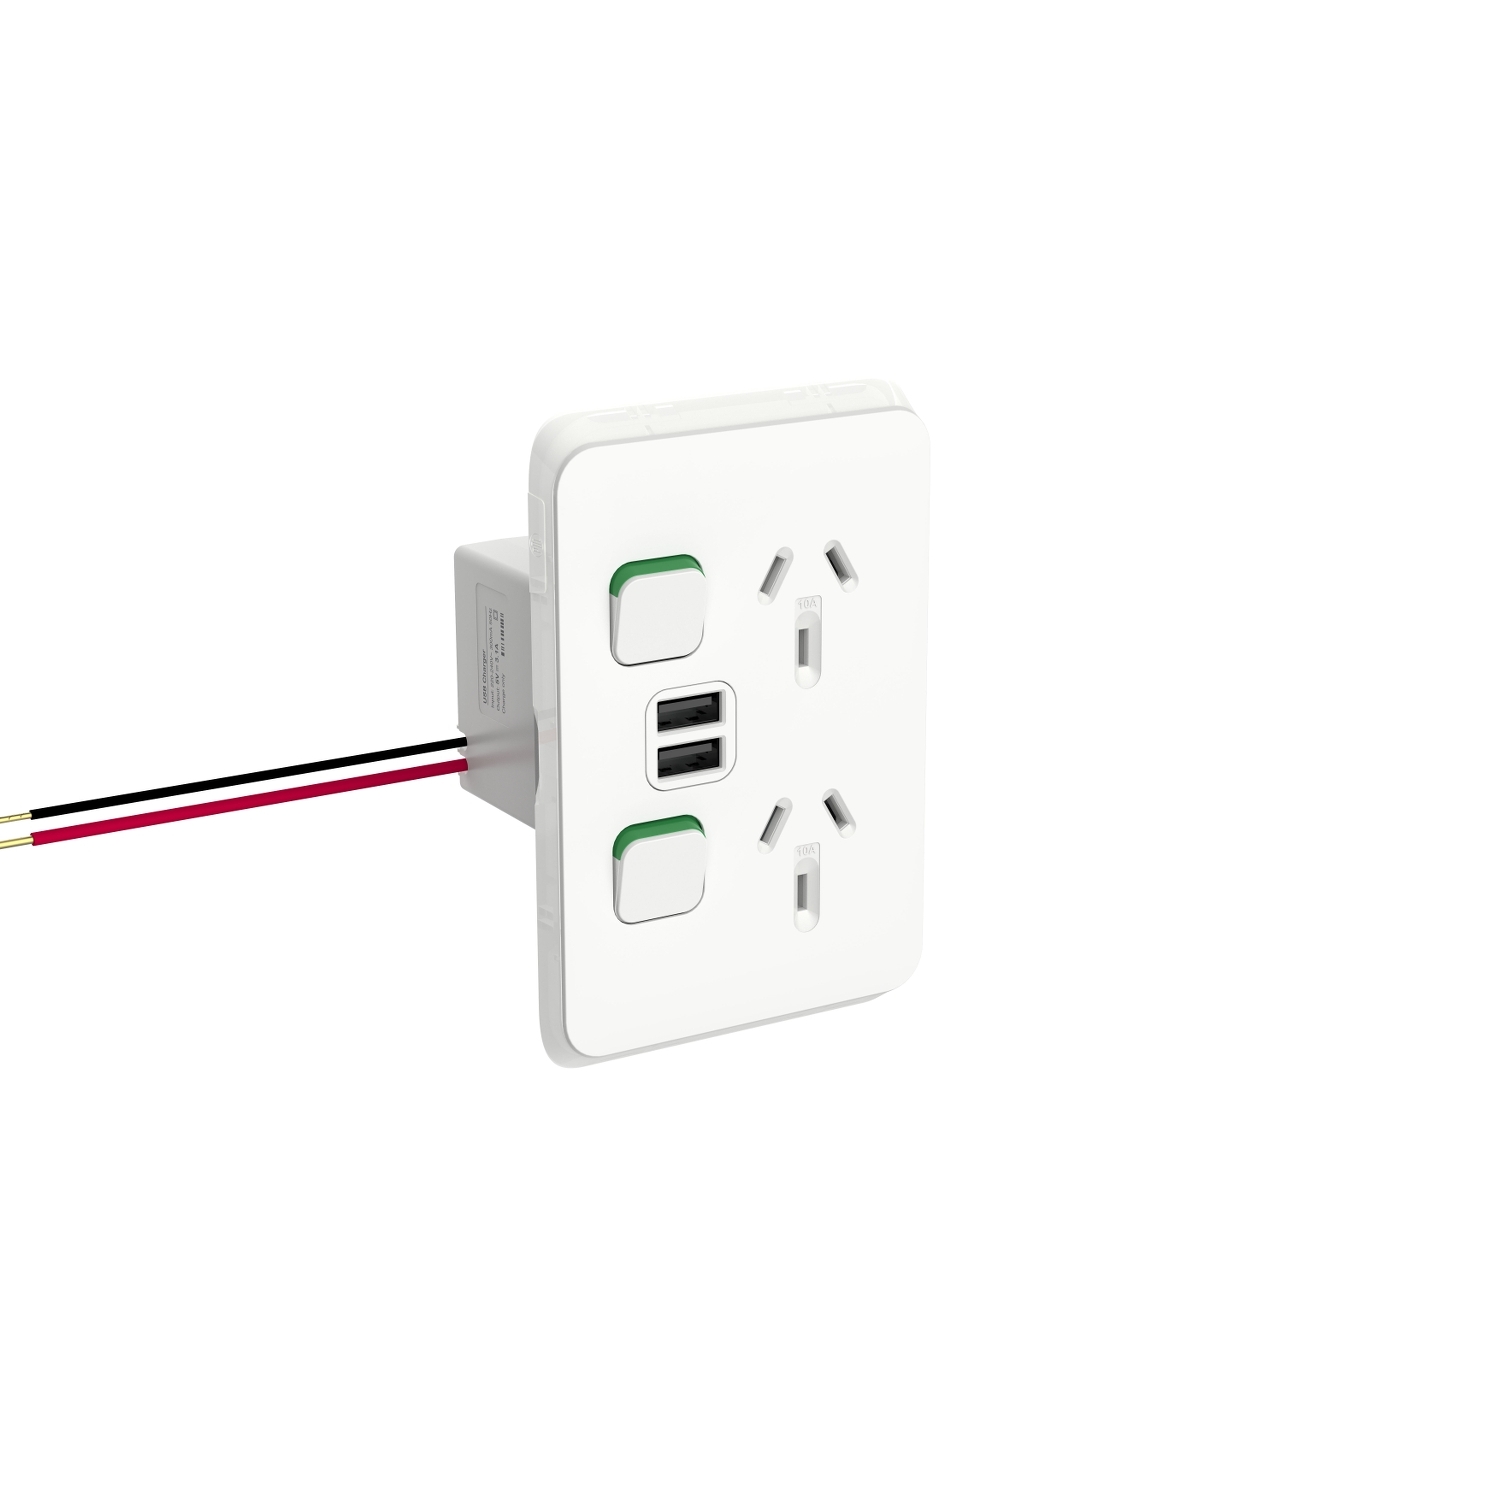 PDL392USB-VW - PDL Iconic Double Switched Socket + Double USB A Vertical 10Amp - Vivid White